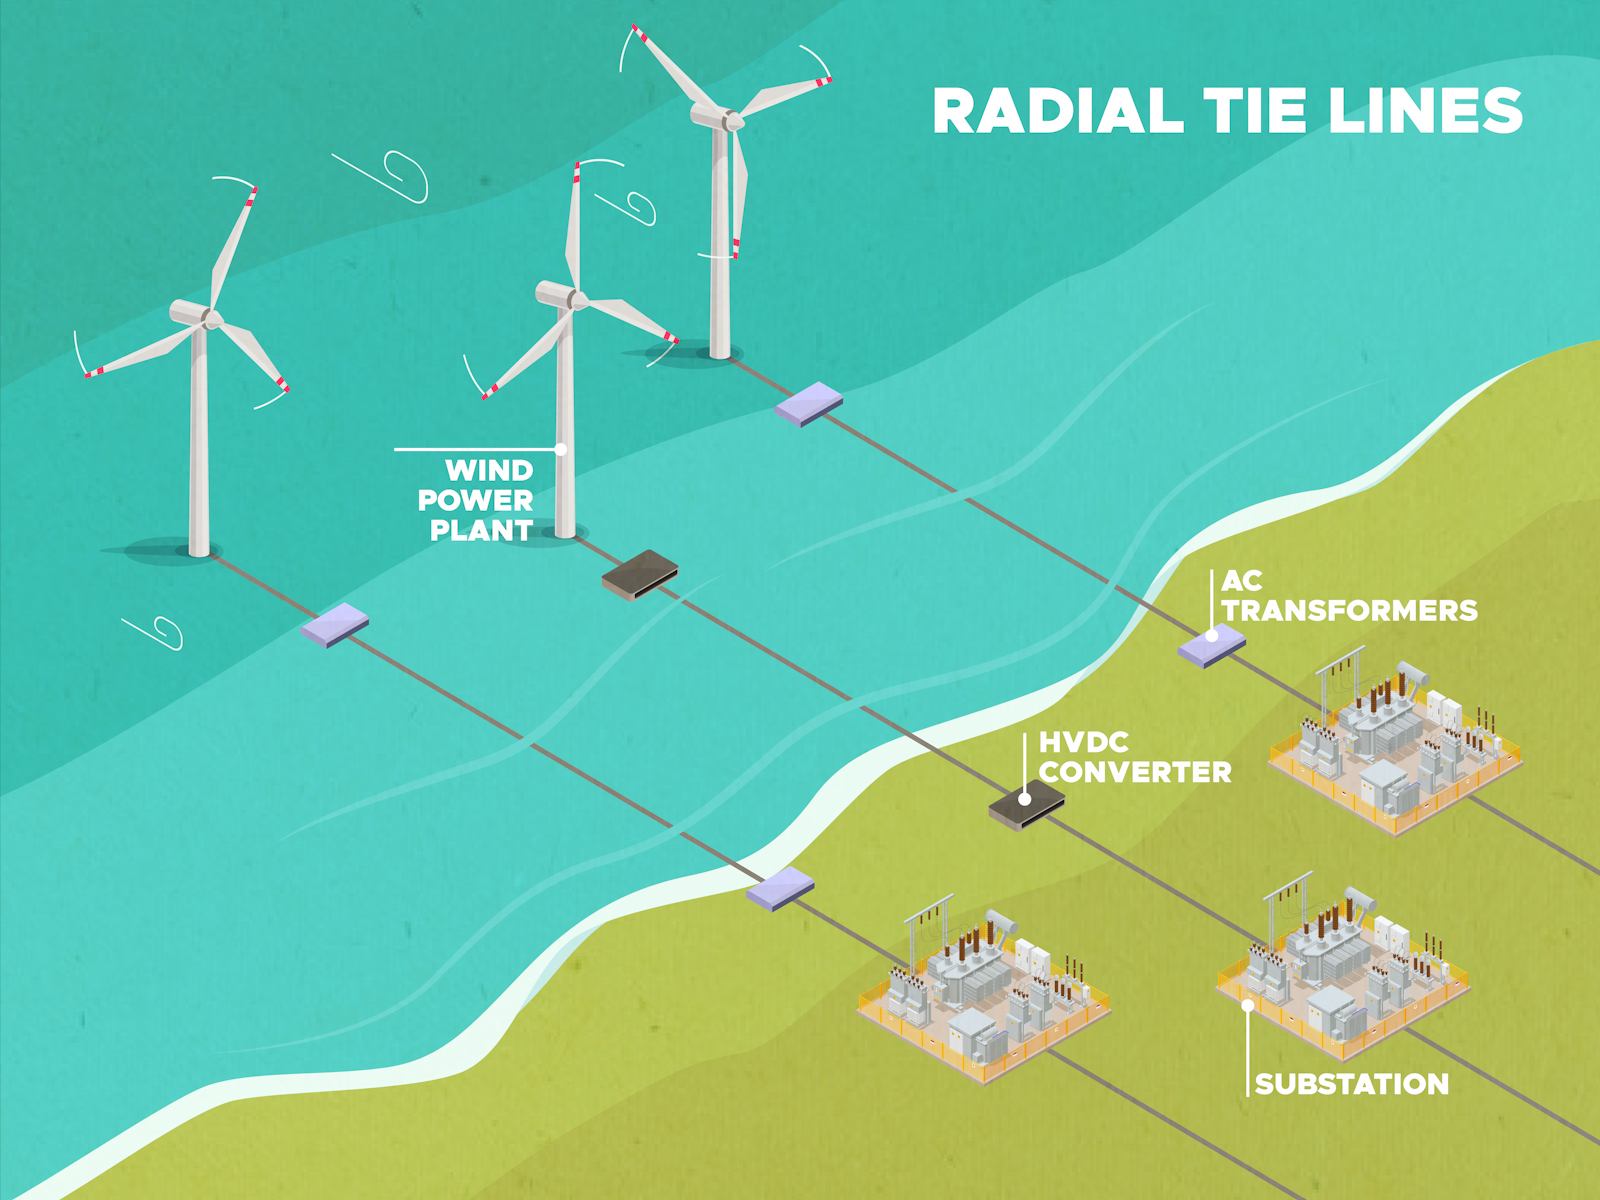 illustration shows a radial structure for transmission of power from offshore wind farms, where each wind farm is connected separately to the coast.